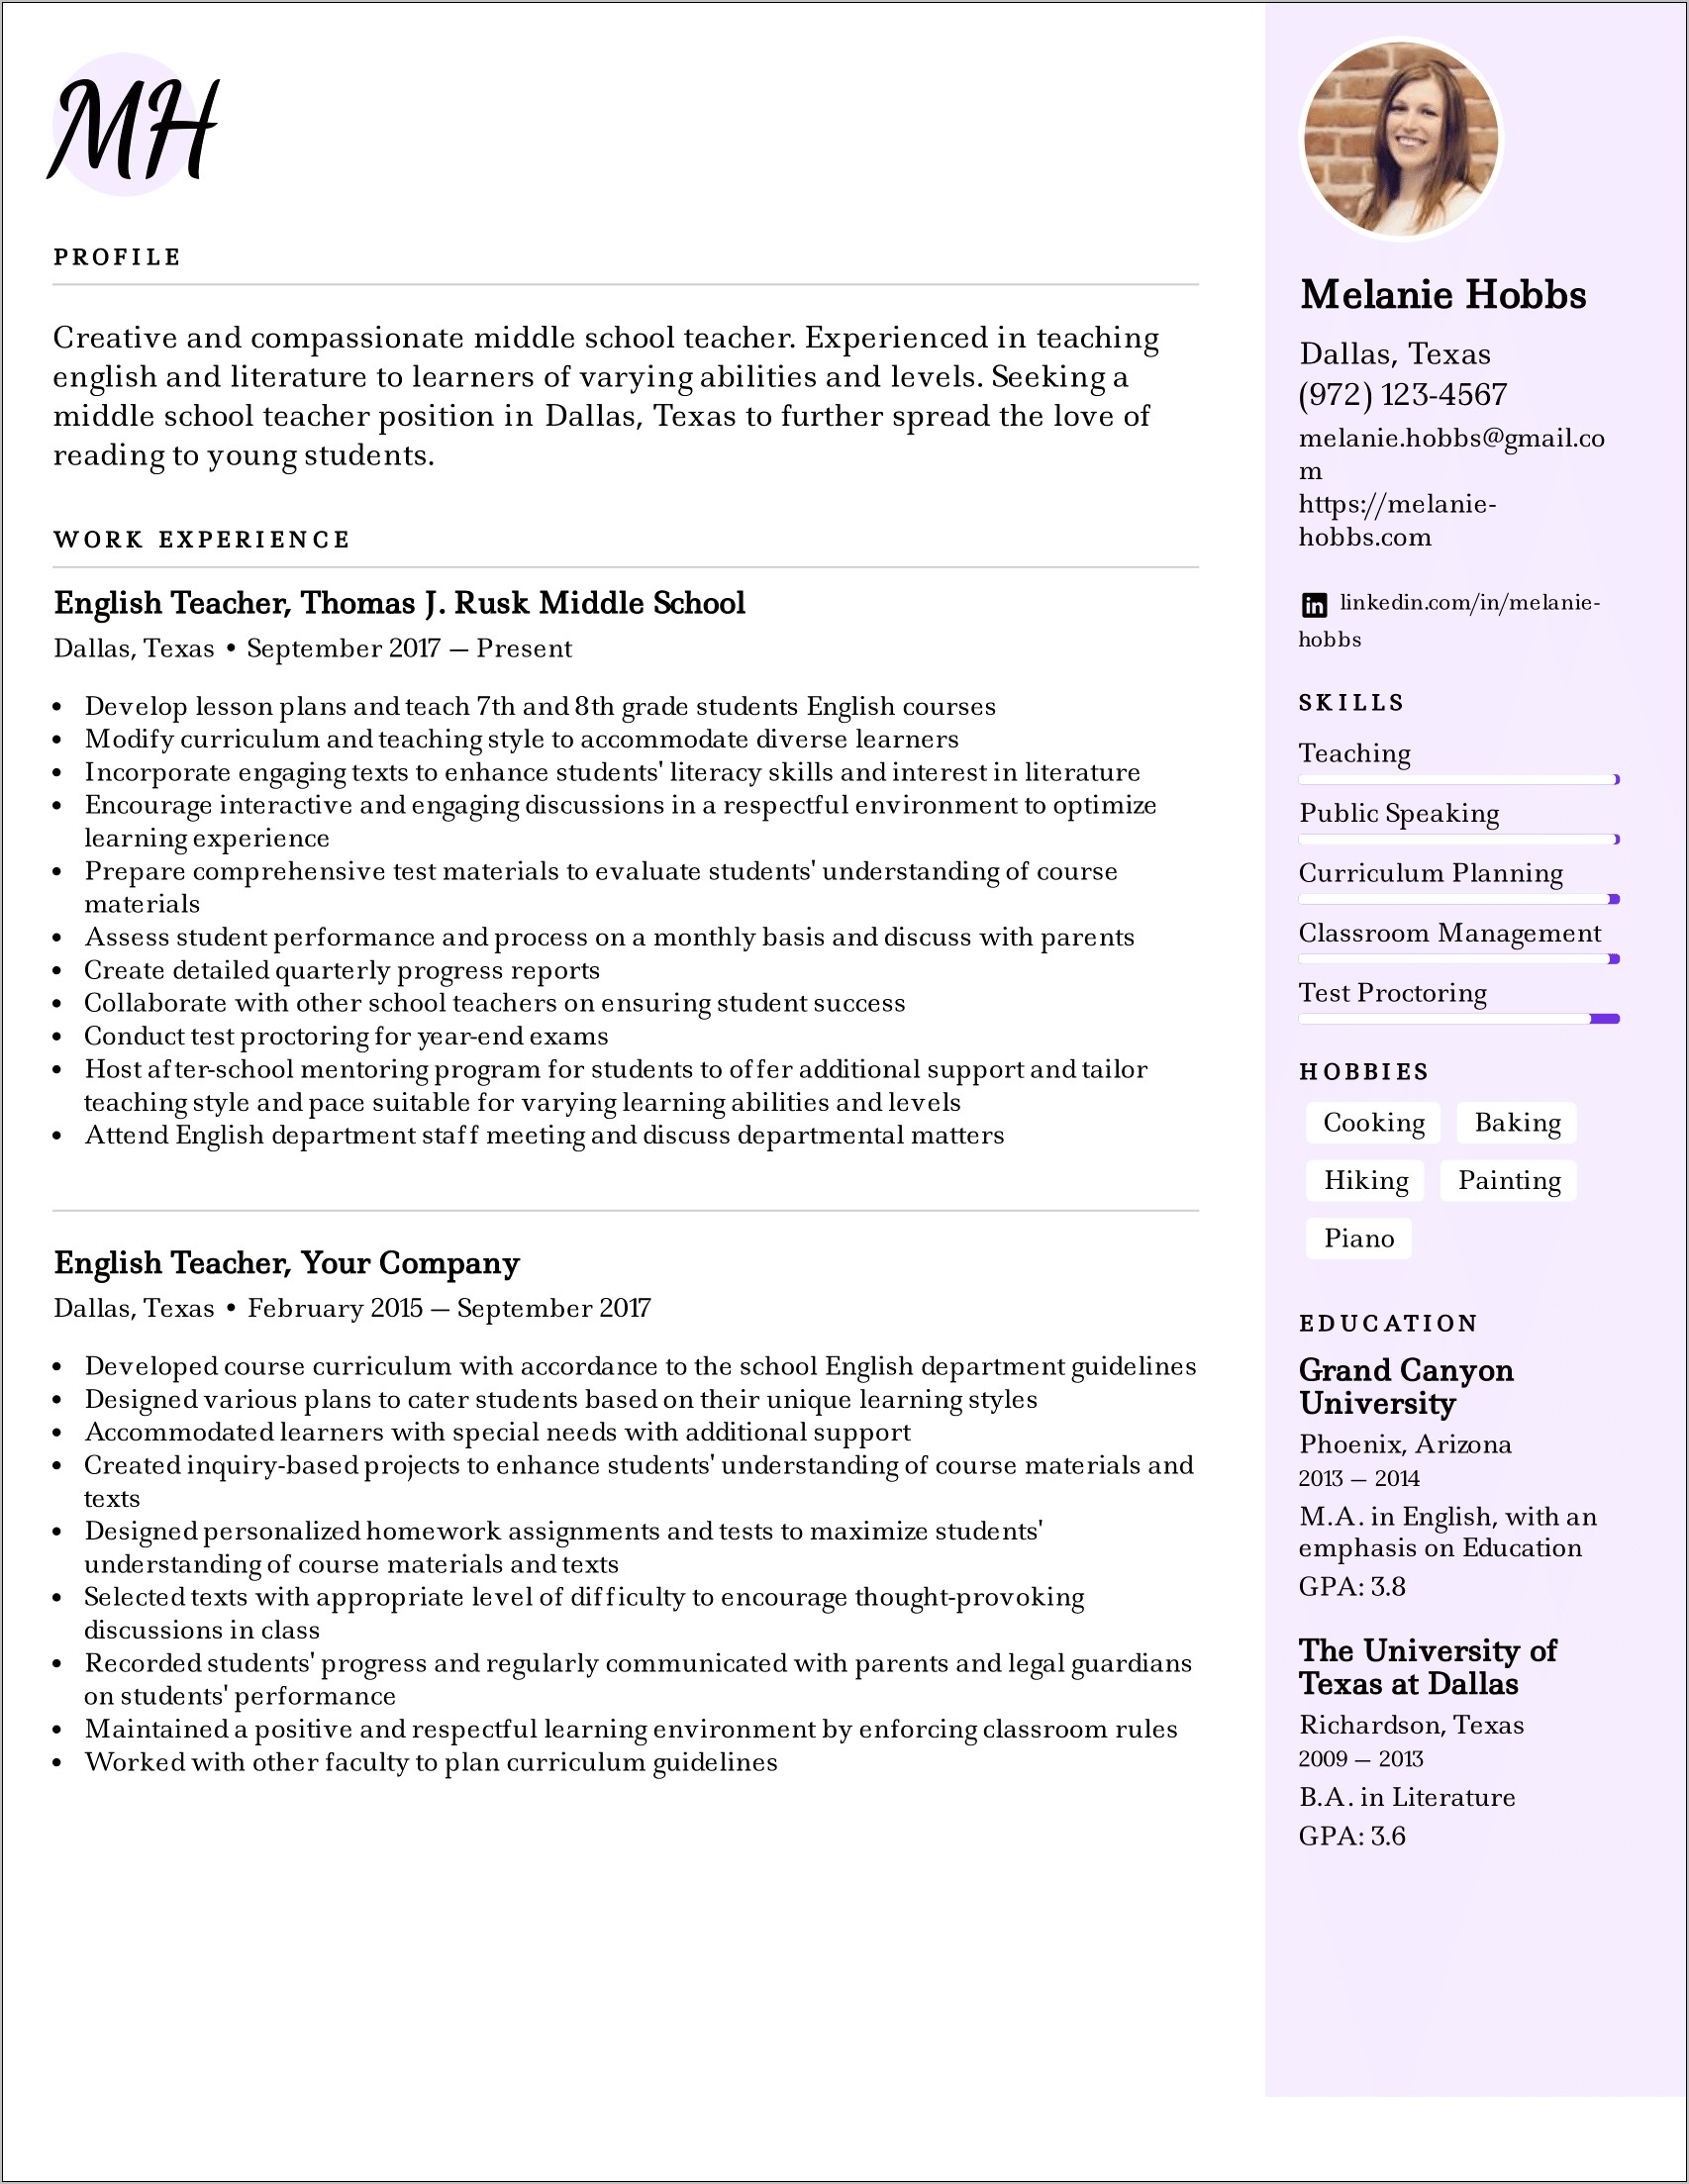 Examples Of Education Listed On Resume